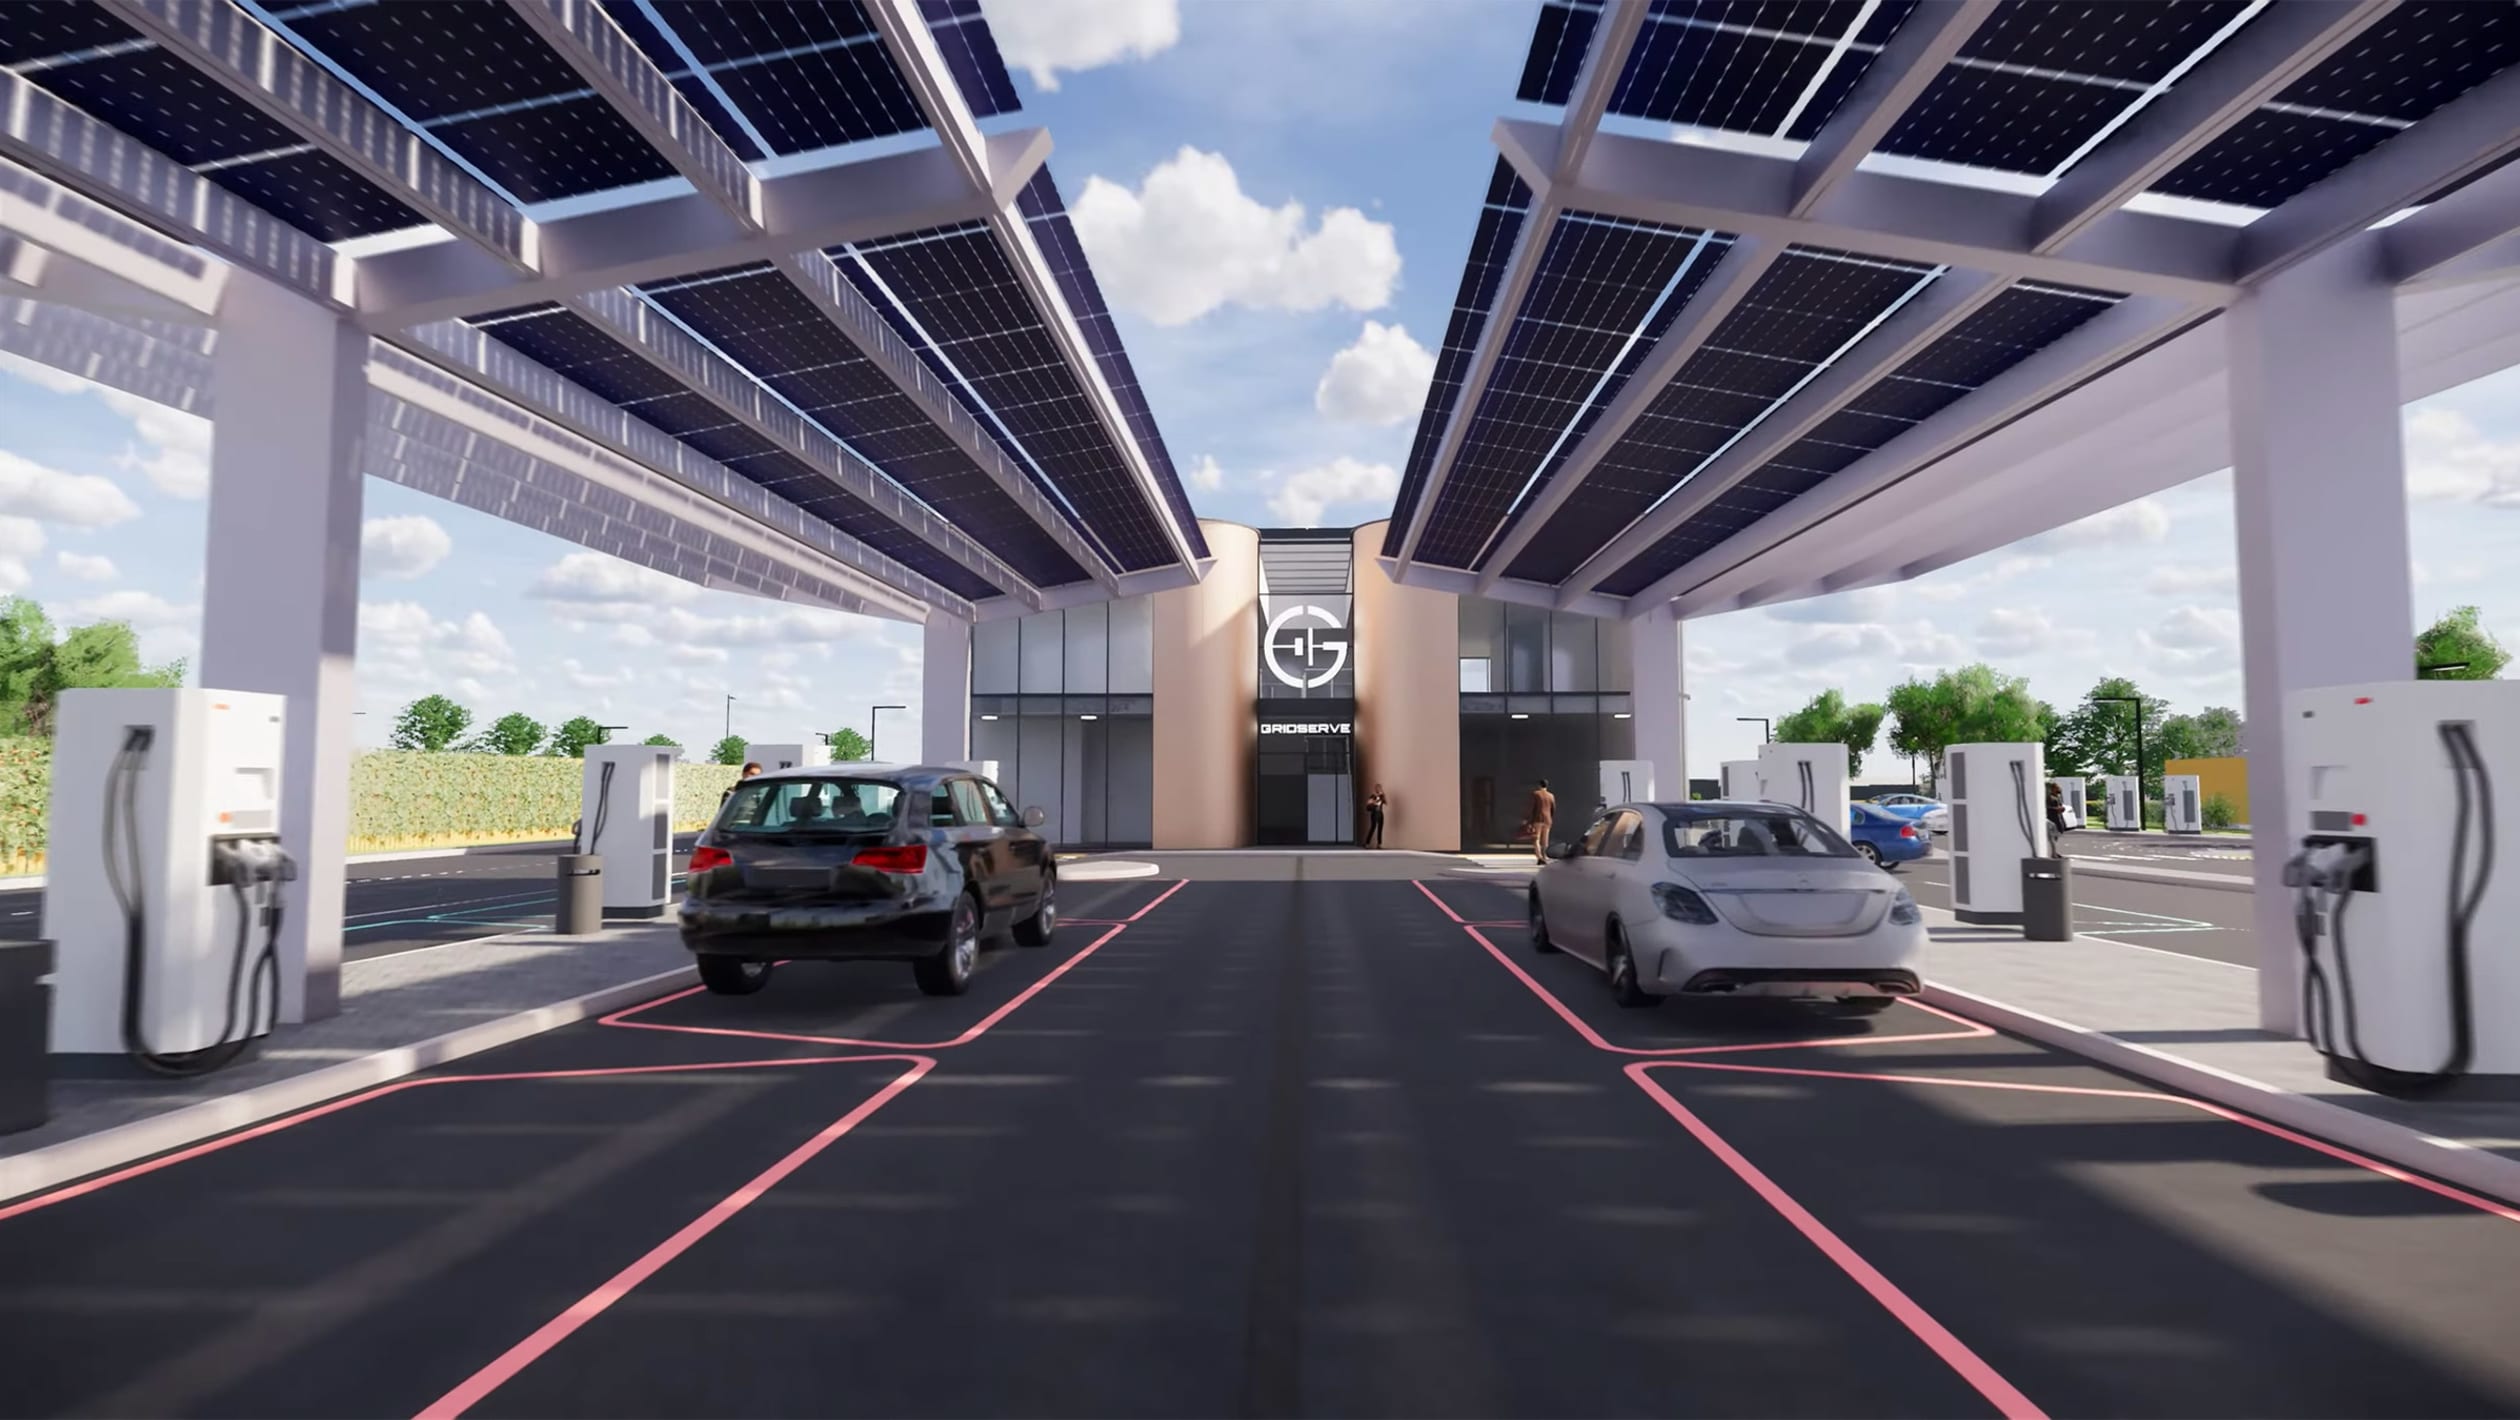 Over 100 electric car rapid charging hubs to be rolled out across the